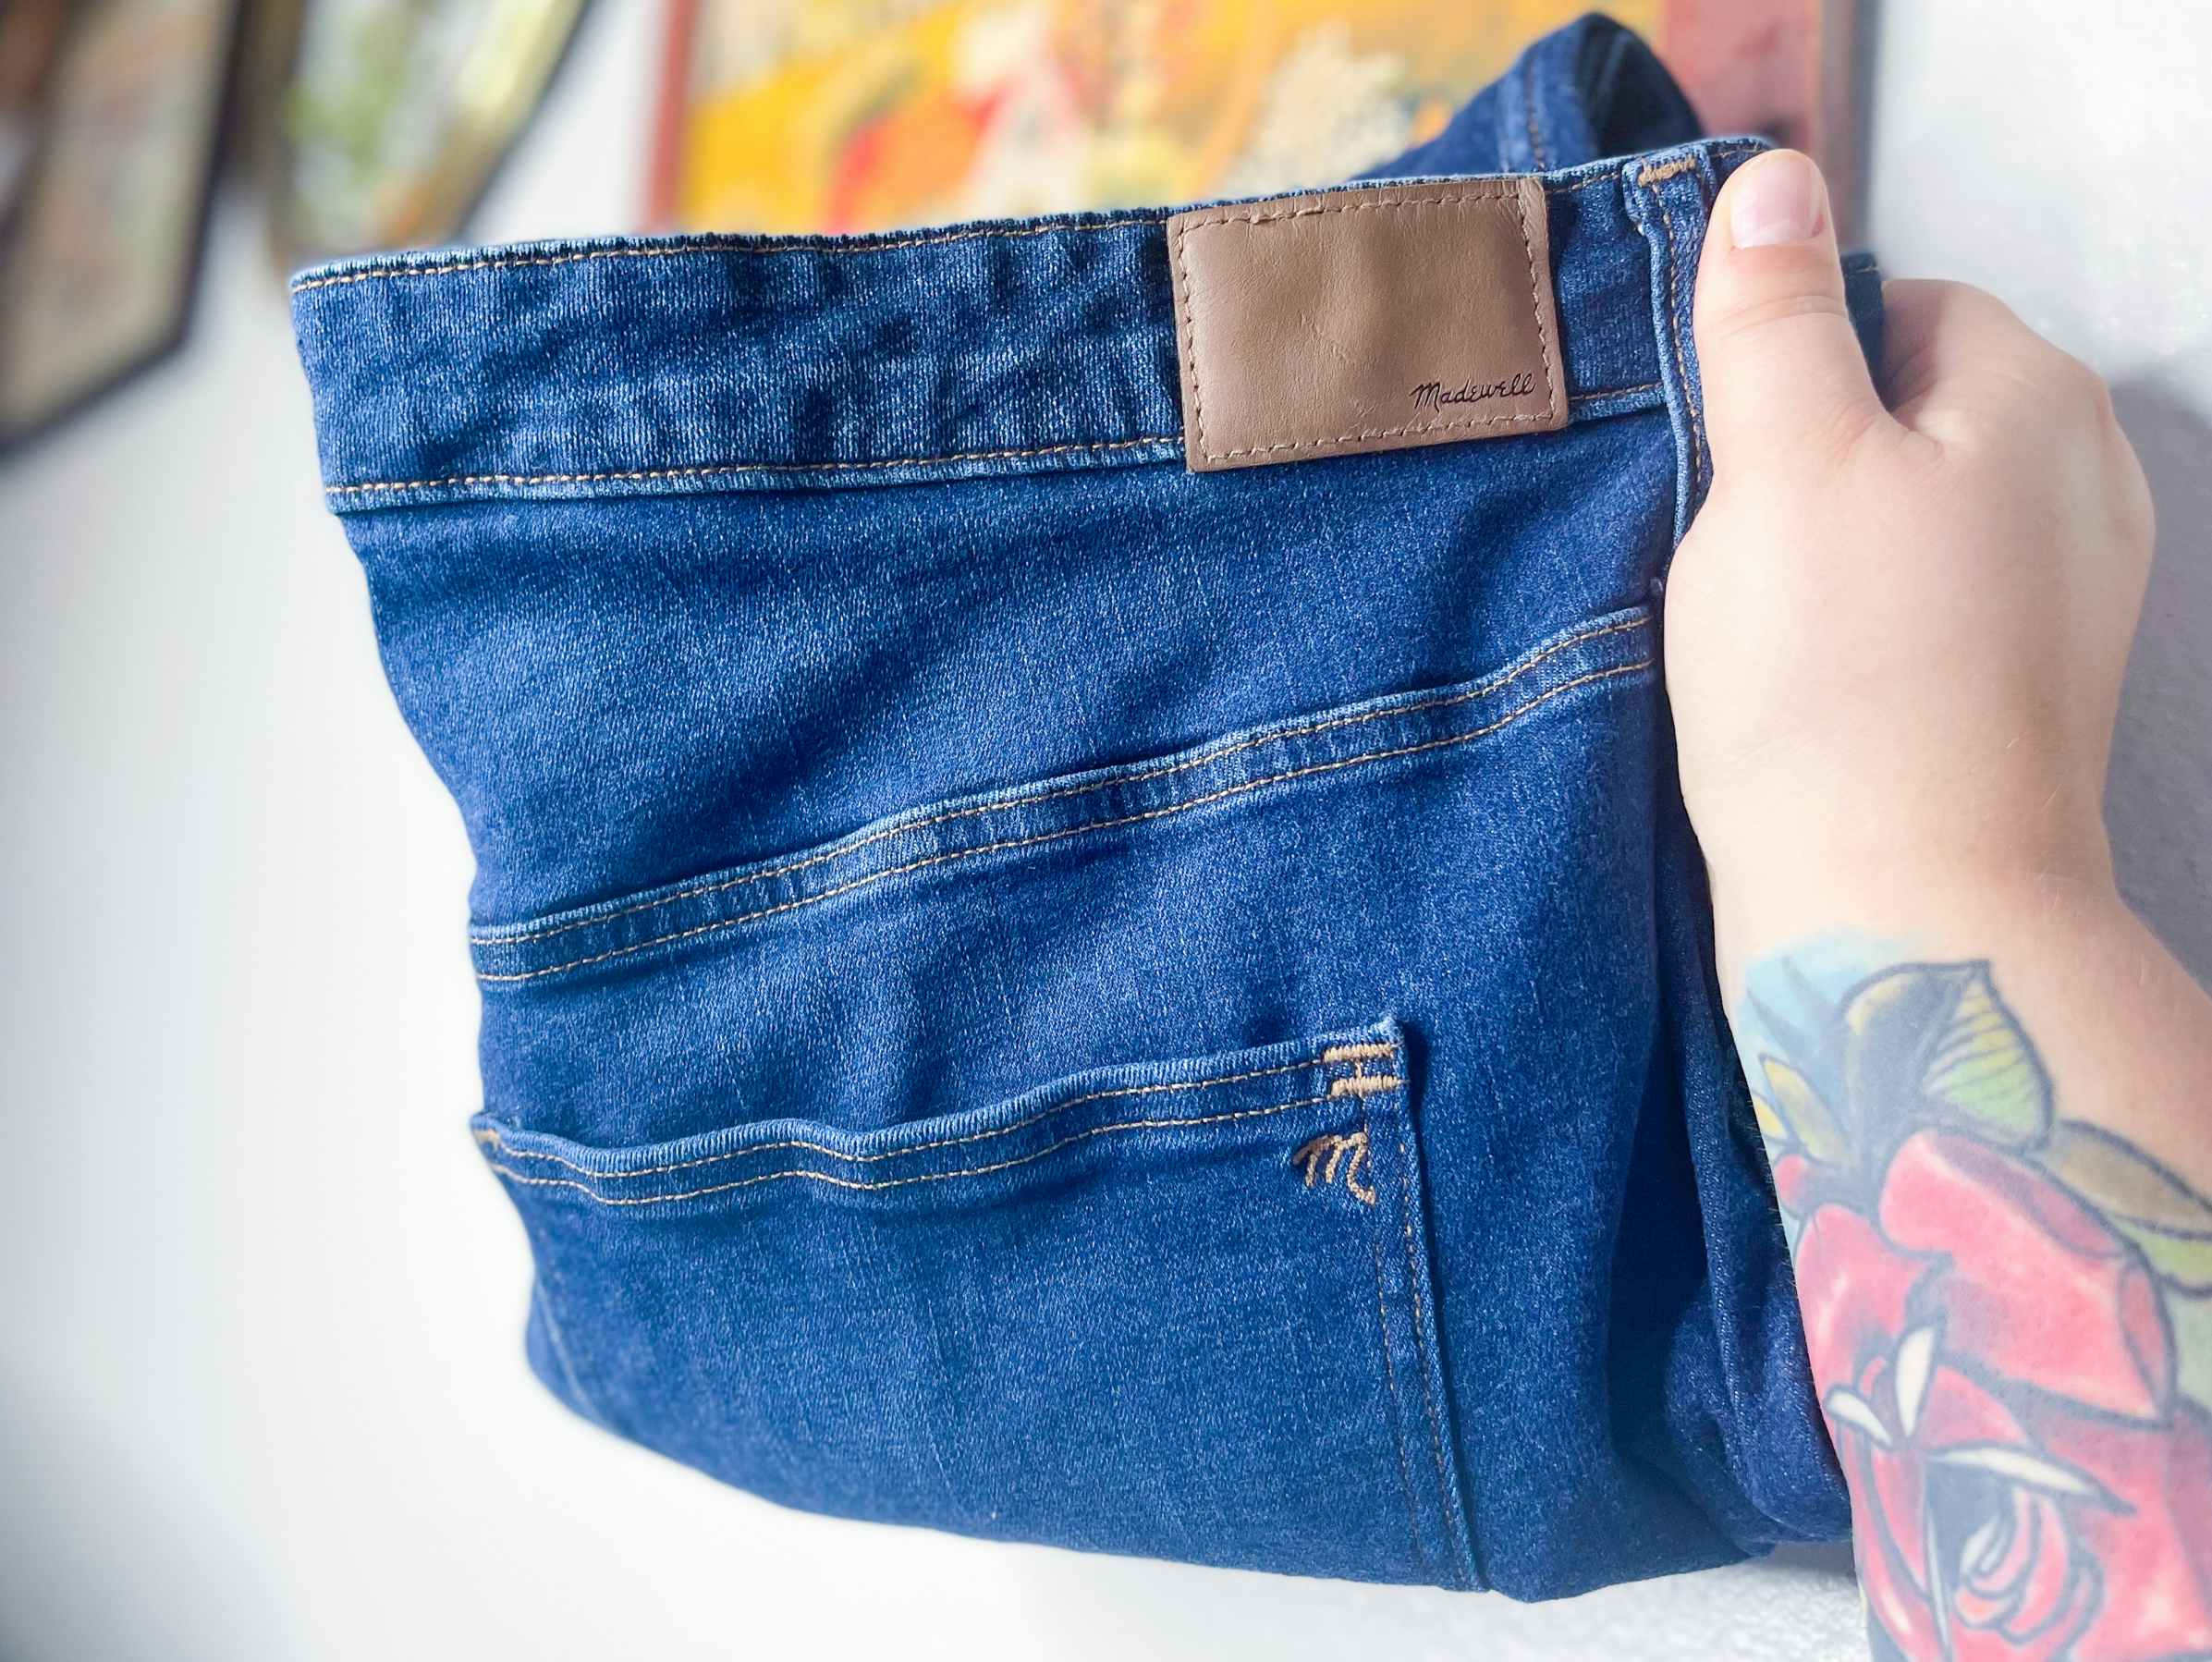 A person's hand holding up a pair of Madewell jeans in their home.